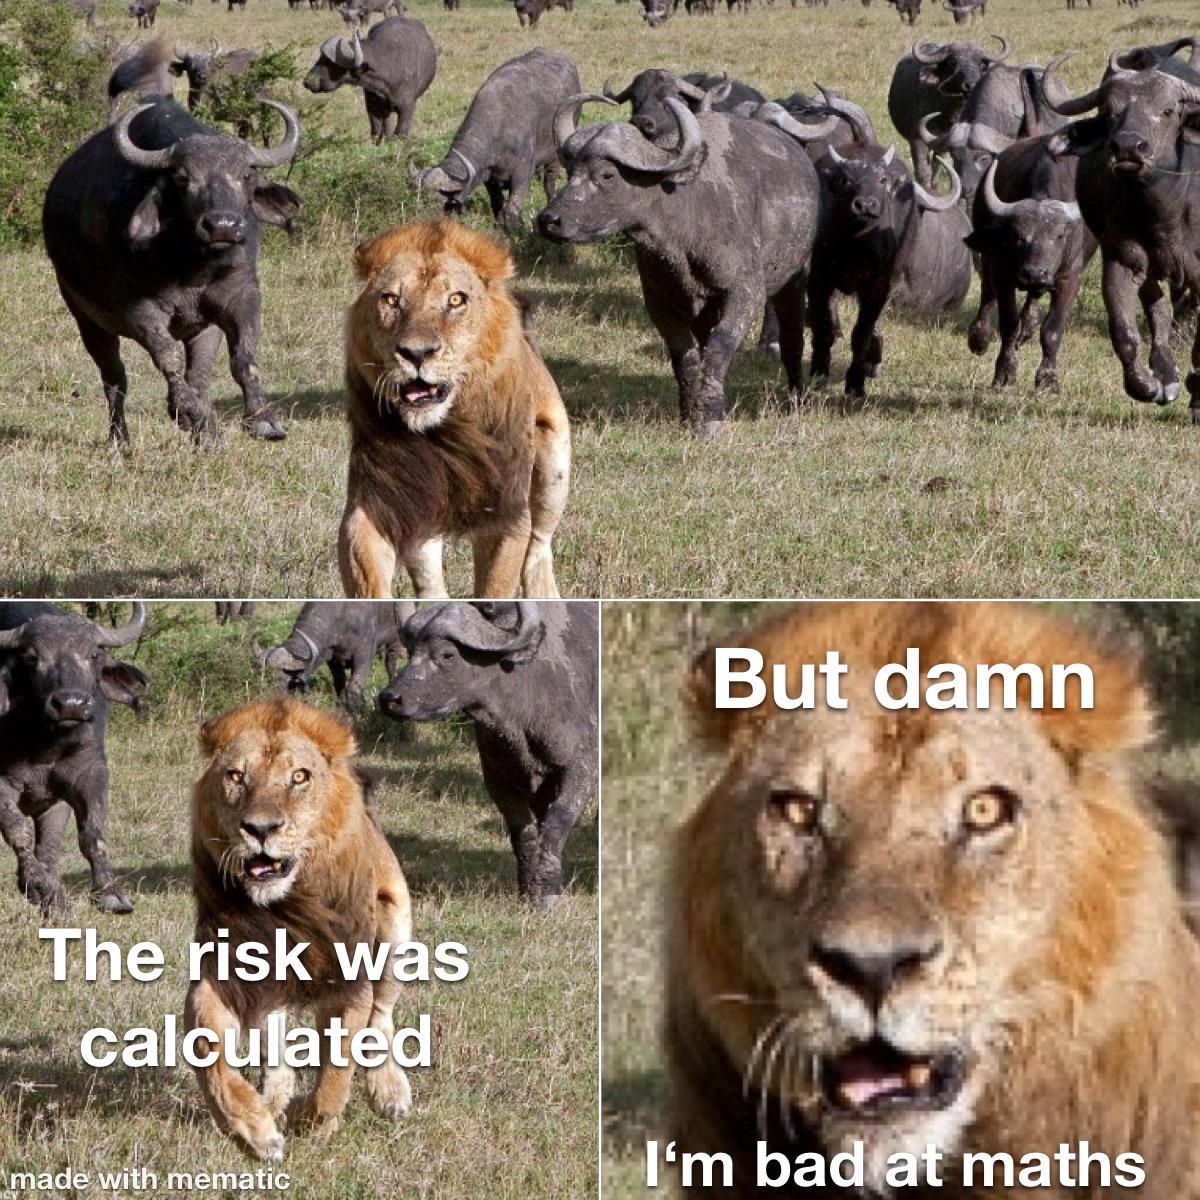 Funny, This Is Patrick, The Lion King, Mufasa, Mafs, Lion King other memes Funny, This Is Patrick, The Lion King, Mufasa, Mafs, Lion King text: *The isk s méd h.mem tiey But.damn 'l„'m bad math 